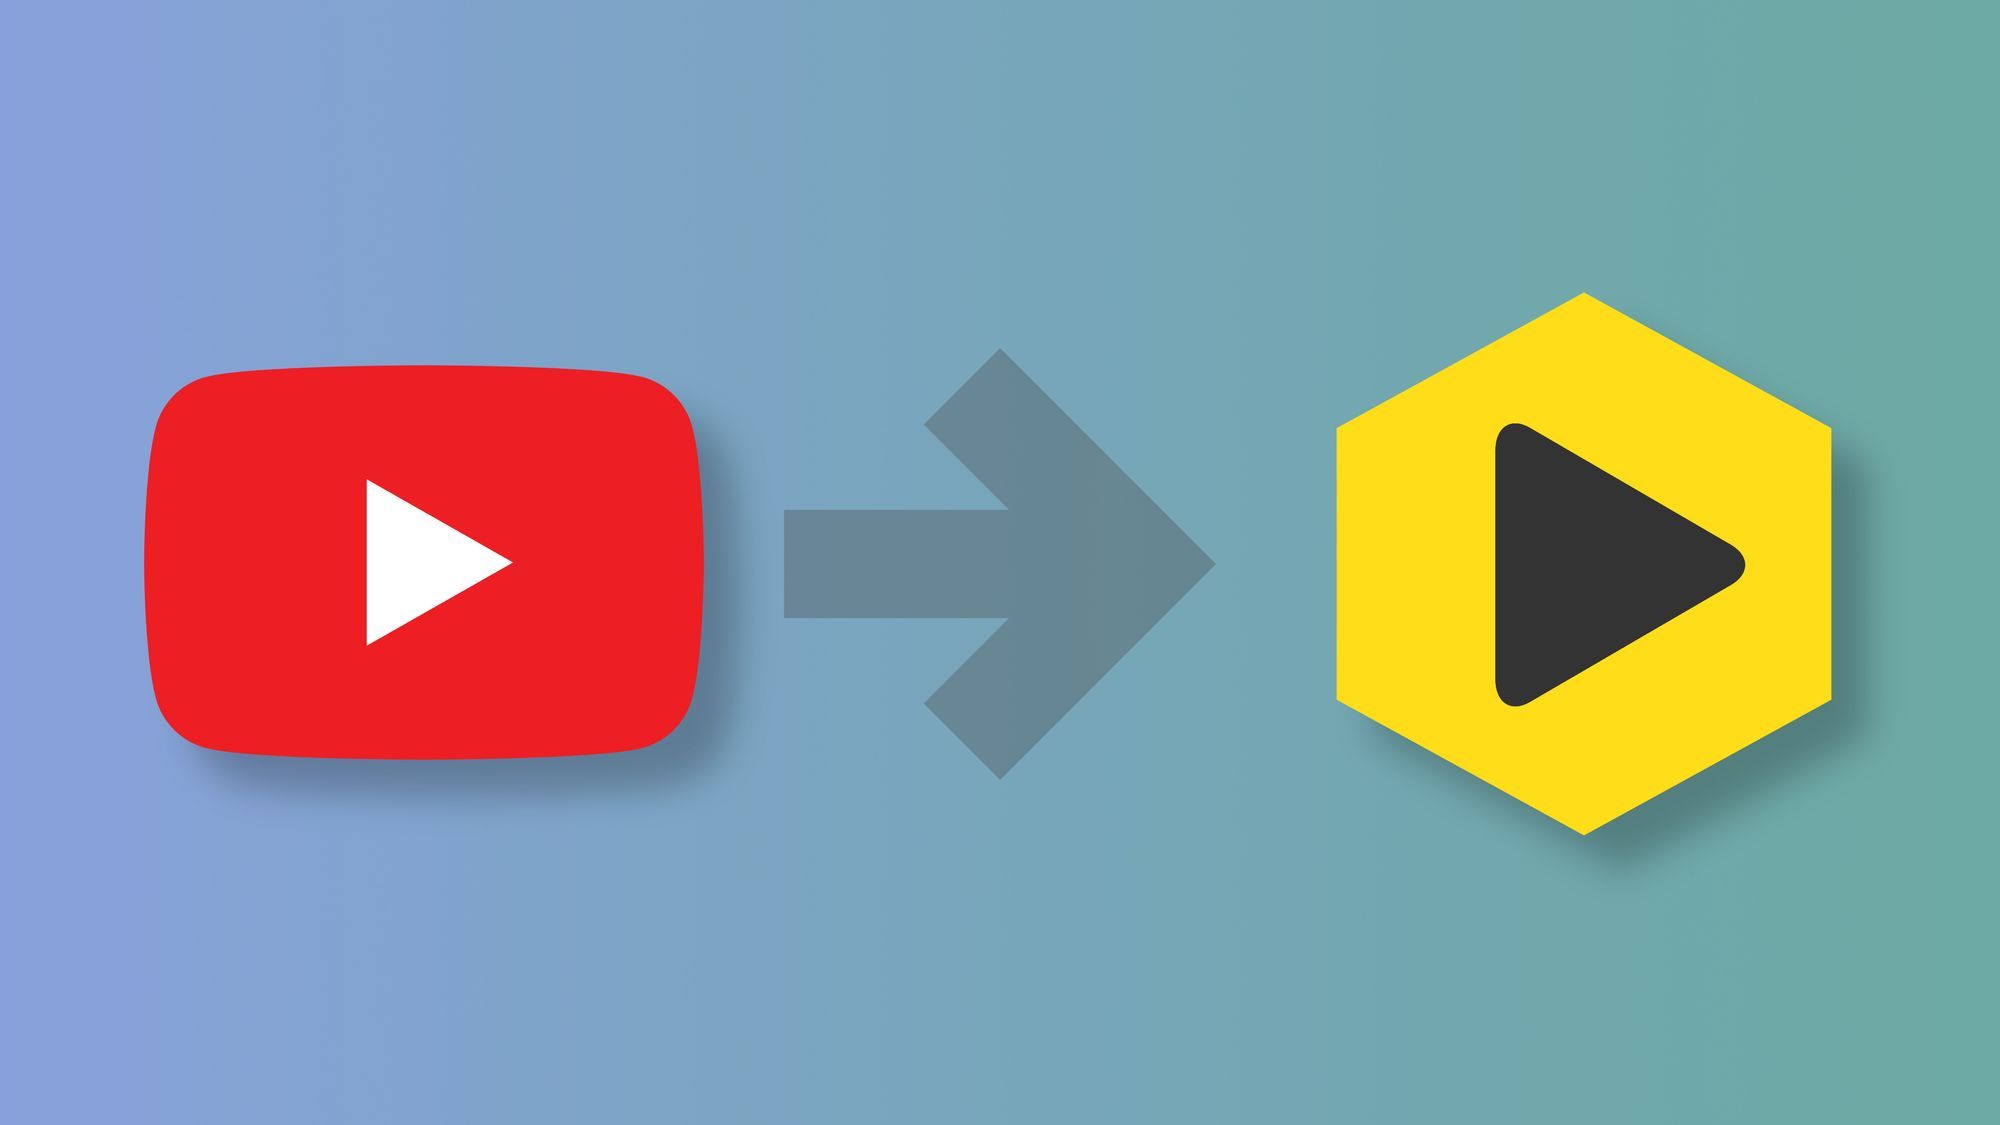 Feature highlight: Automatic YouTube conversions